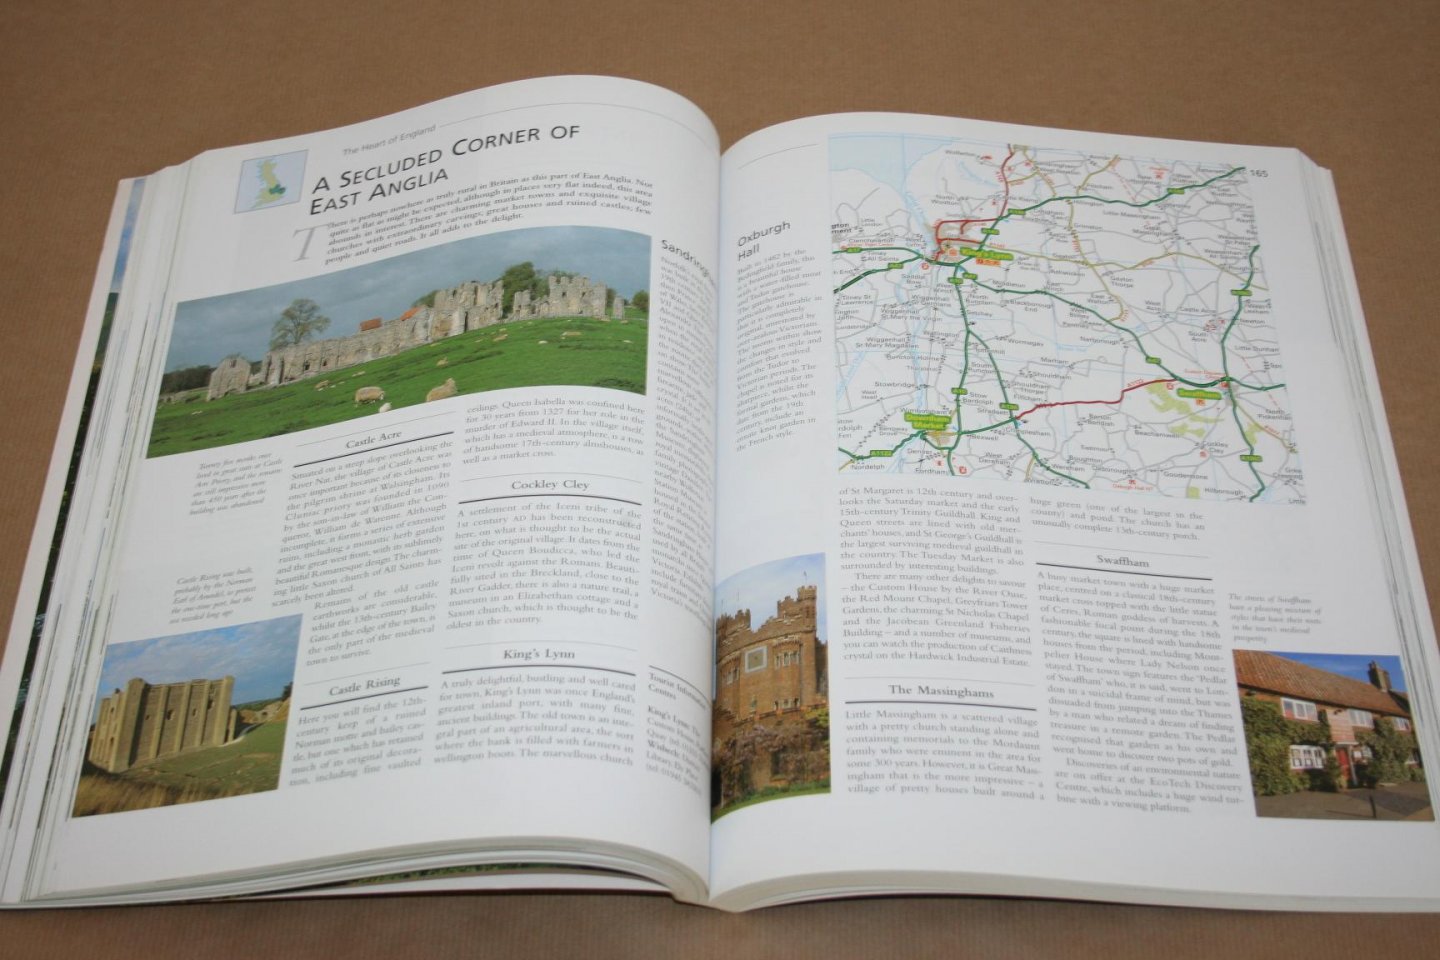  - Discover Britain -- The illustrated walking and exploring guide